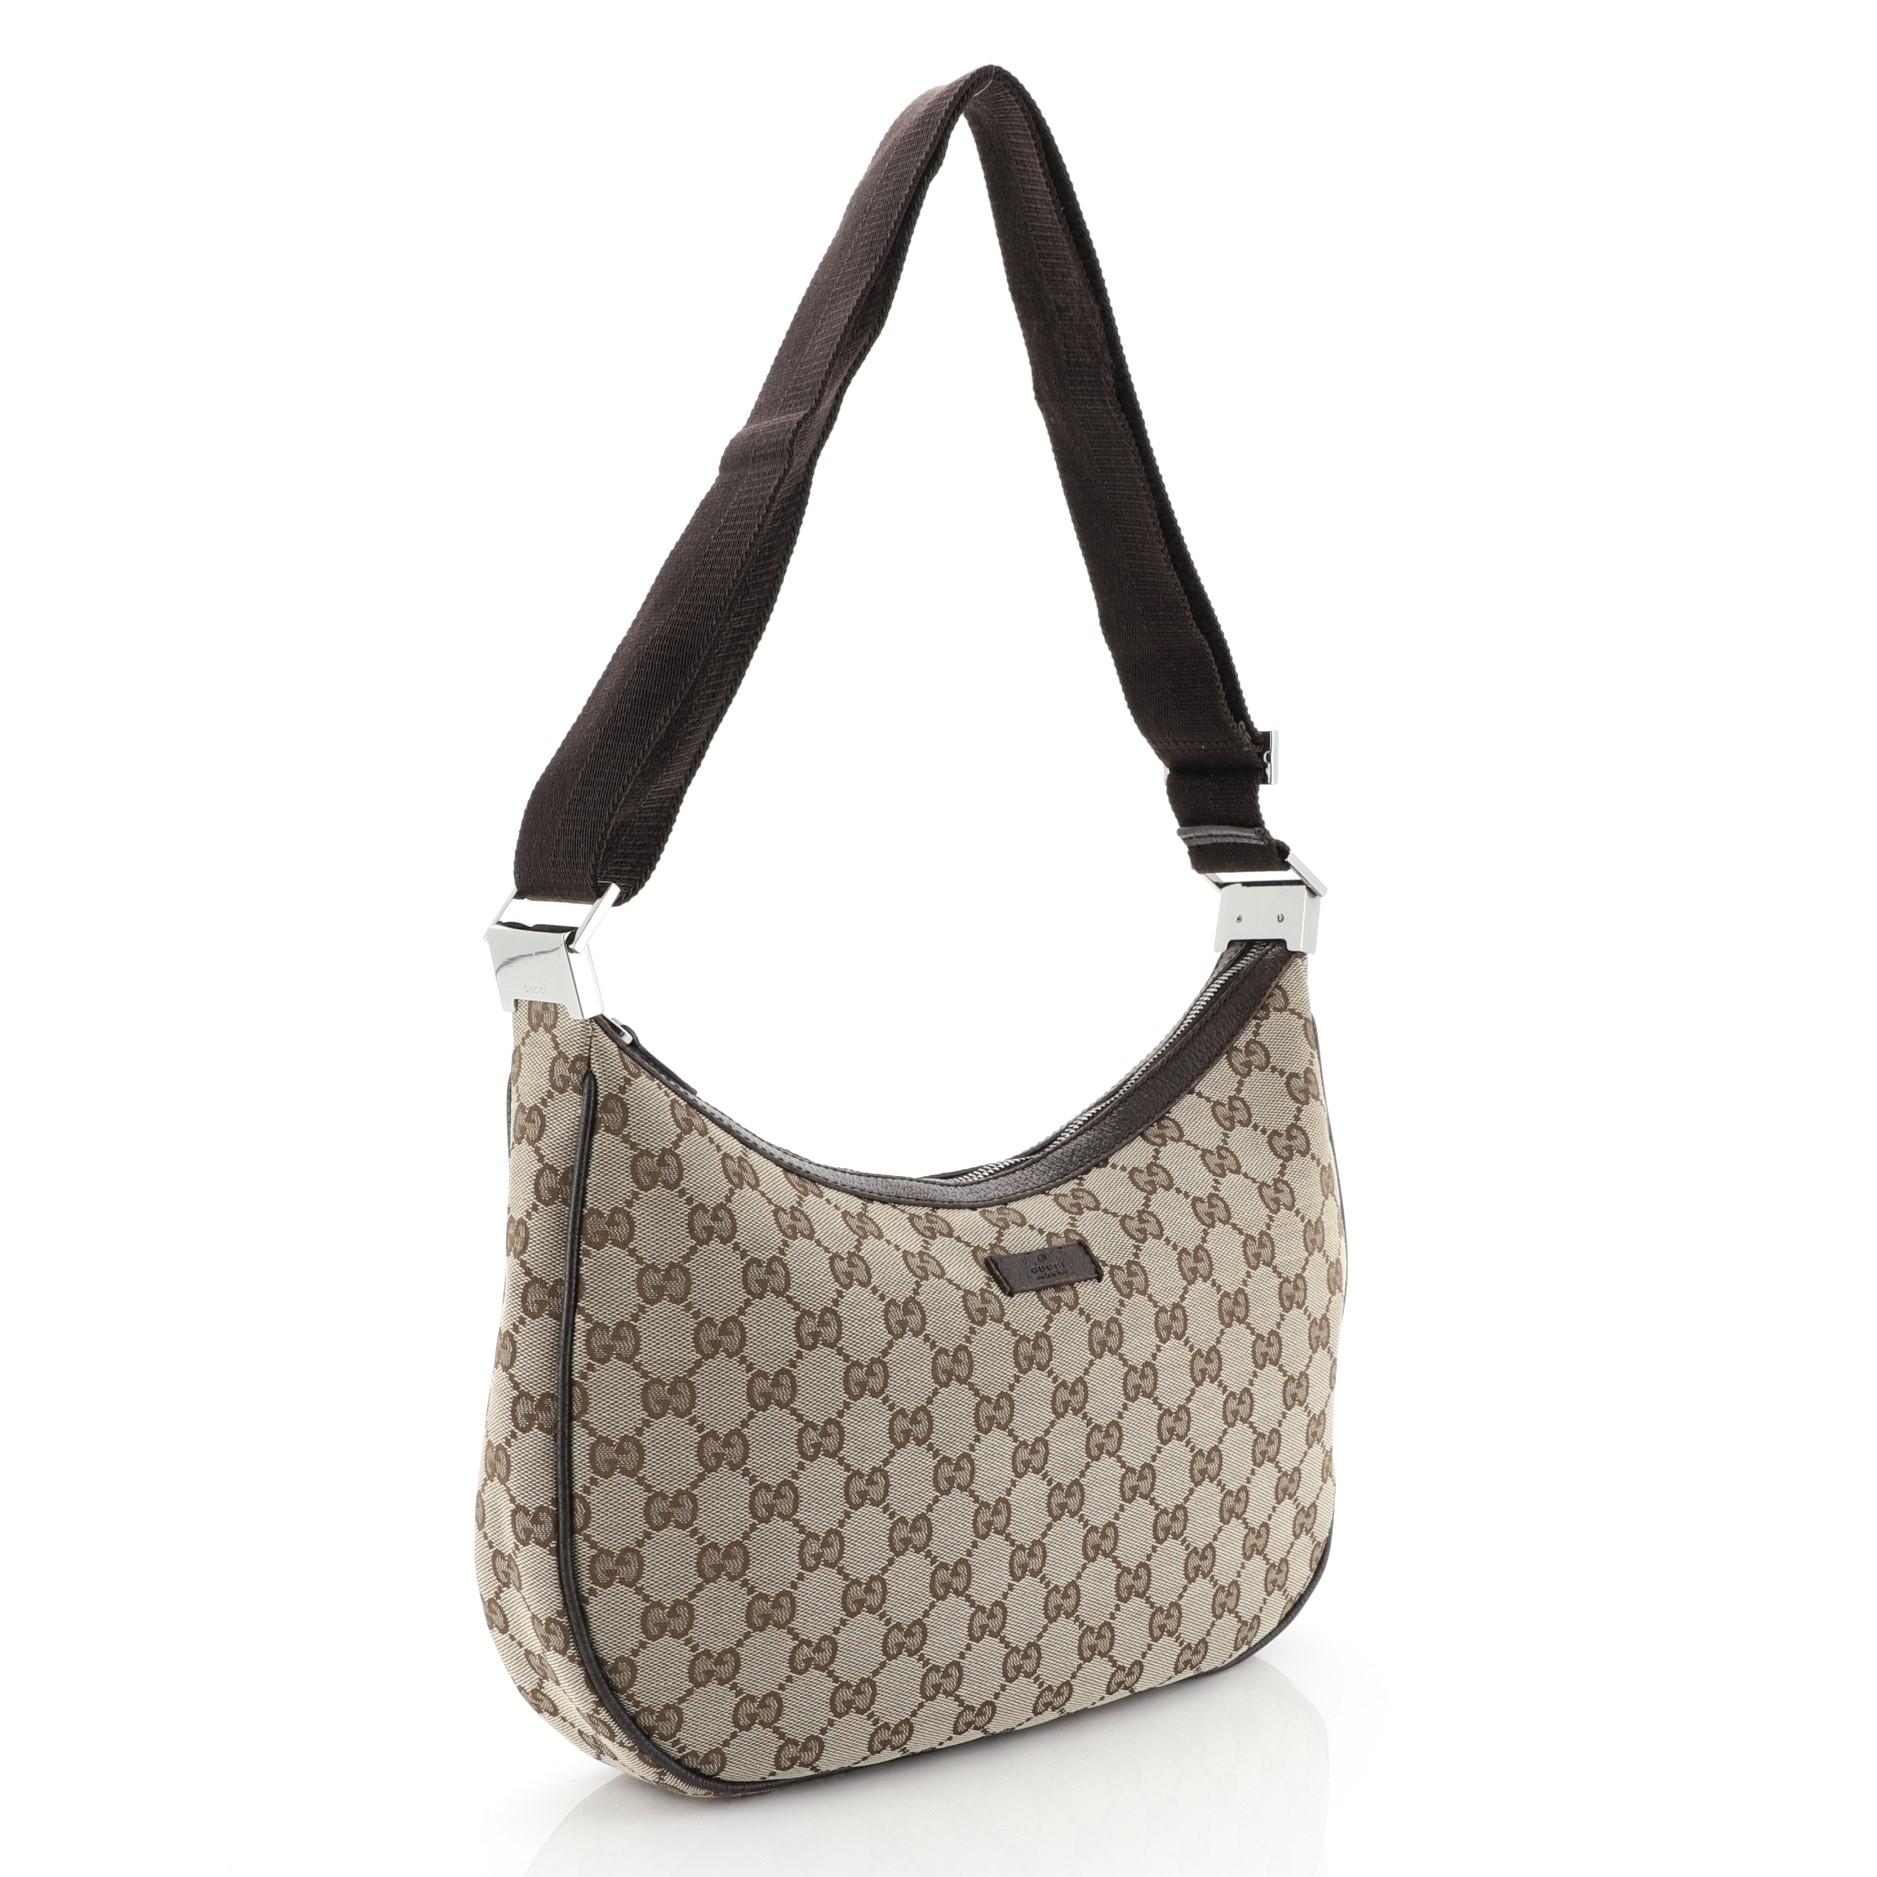 This Gucci Web Saddle Messenger GG Canvas Medium, crafted in brown GG canvas, features web shoulder strap, leather trim, and silver-tone hardware. Its zip closure opens to a brown fabric interior with side zip and slip pockets. 

Estimated Retail